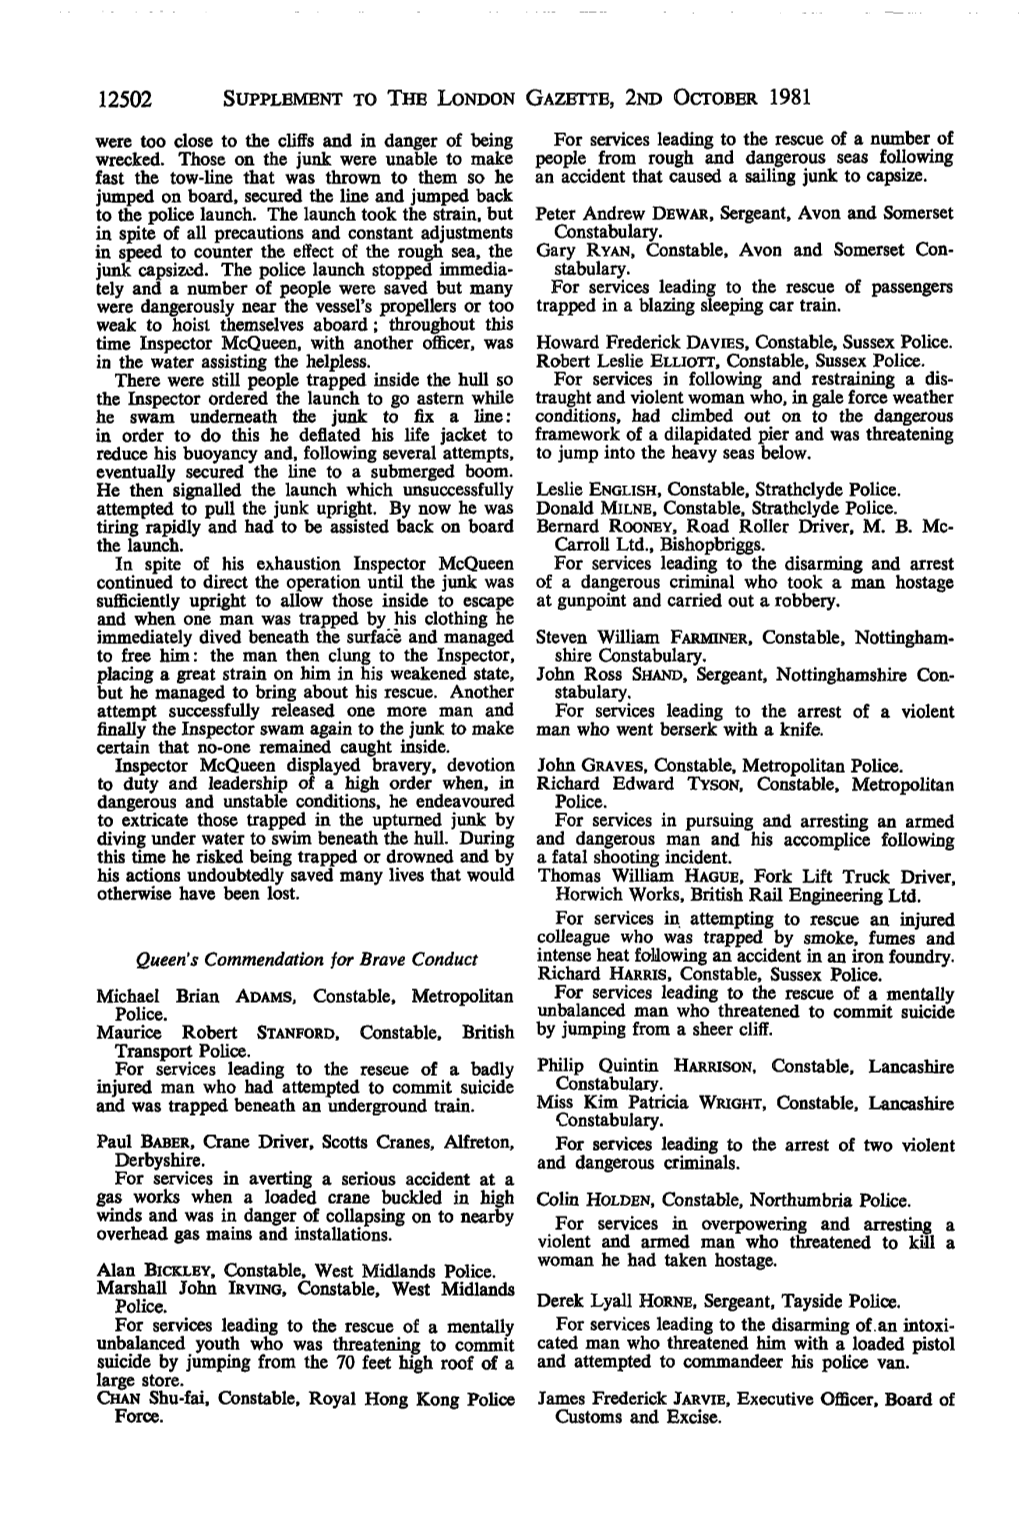 SUPPLEMENT to the LONDON GAZETTE, 2ND OCTOBER 1981 Were Too Close to the Cliffs and in Danger of Being for Services Leading to the Rescue of a Number of Wrecked